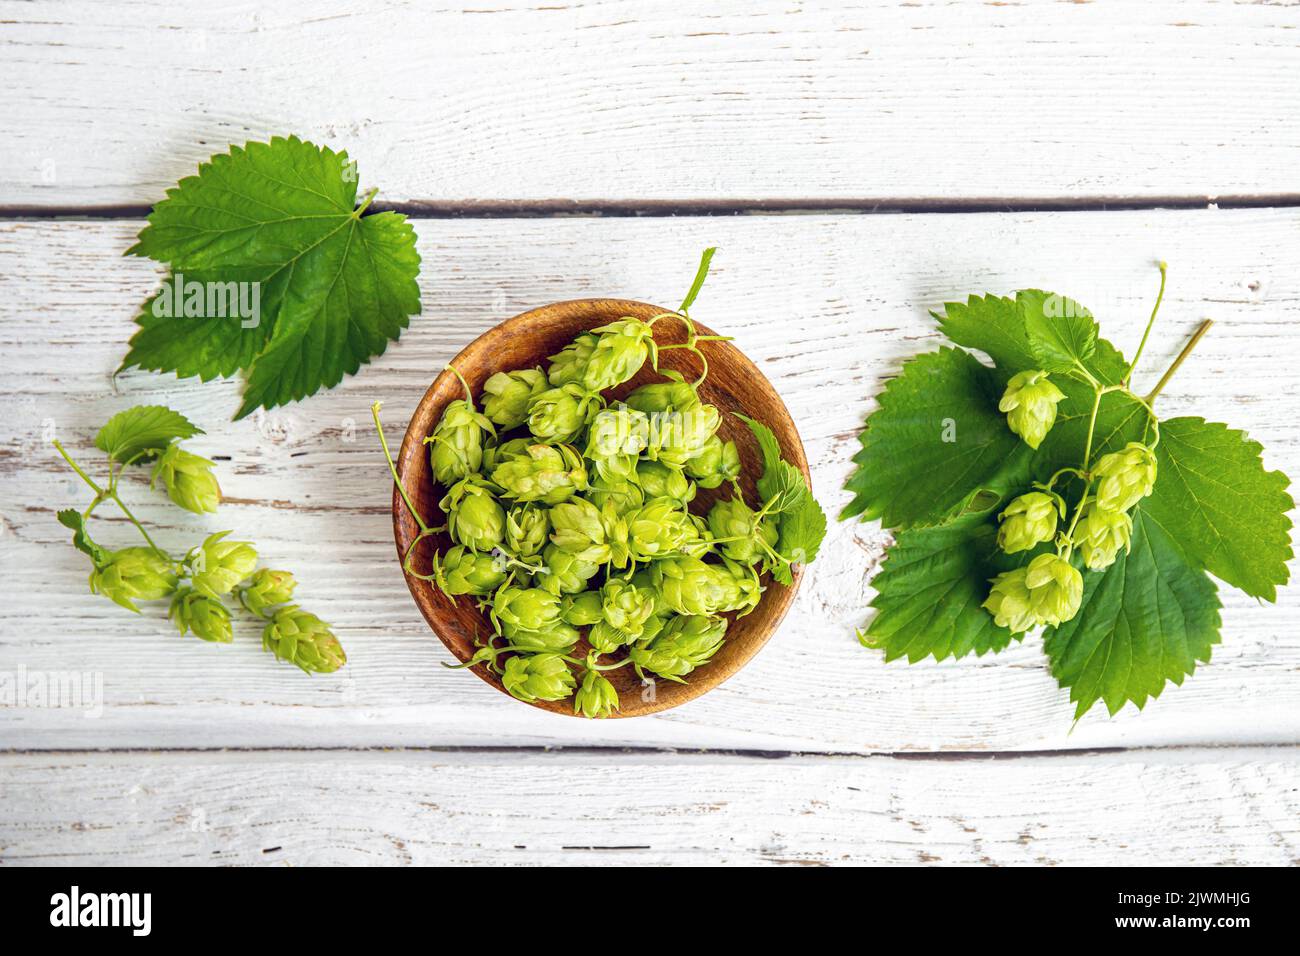 Picked herbal medicinal plant Humulus lupulus, the common hop or hops. Hops flowers in wood bowl on white wood background, indoors home. Flat lay view Stock Photo